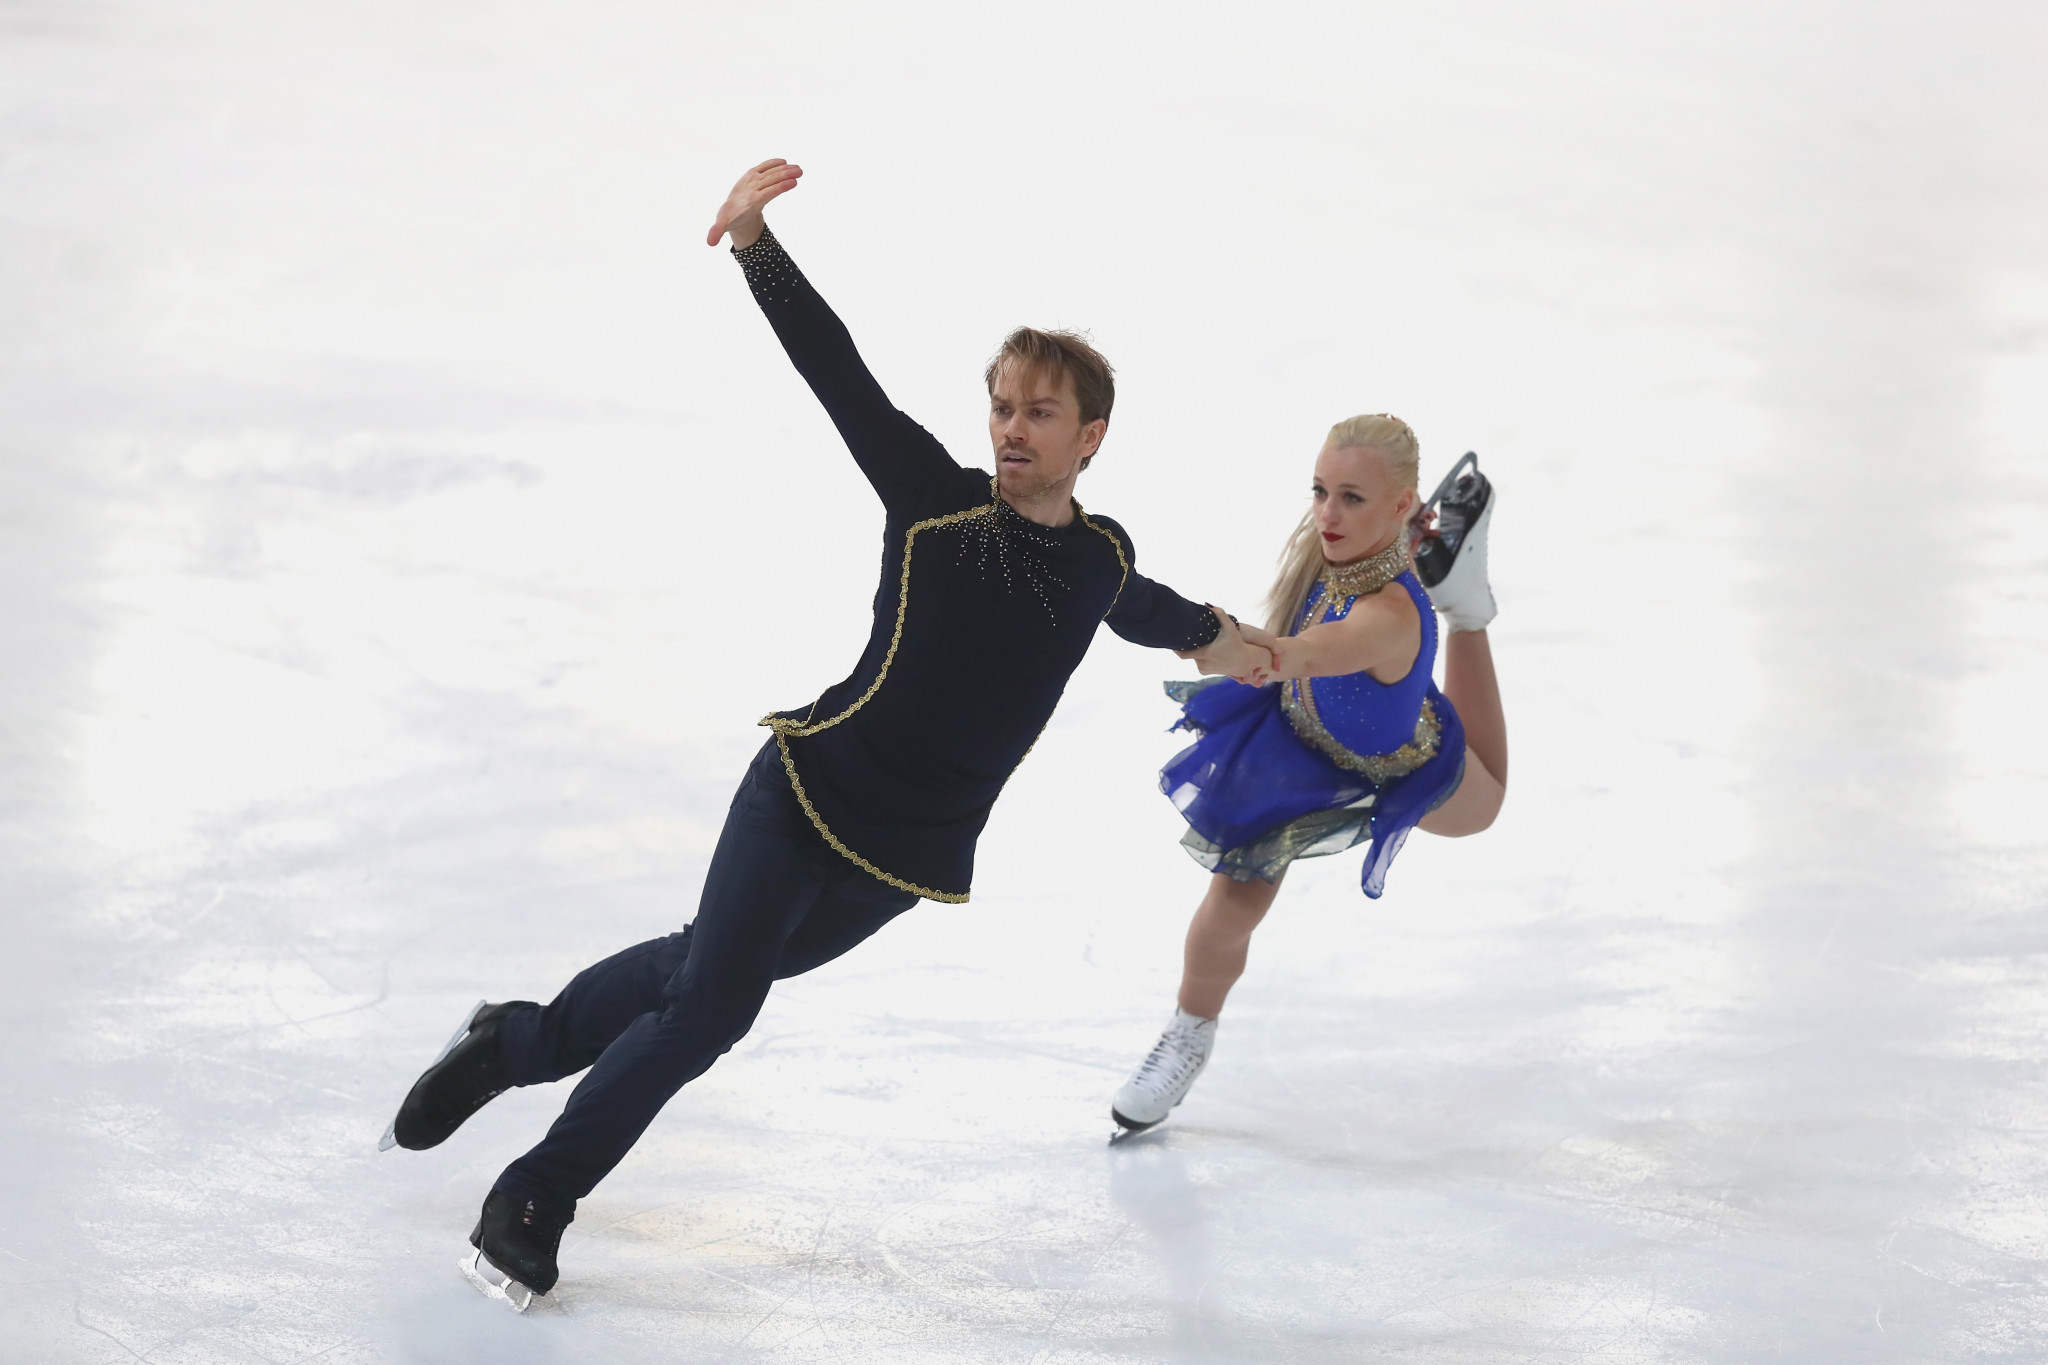 BOA selects Buckland and Coomes for Pyeongchang 2018 following Nebelhorn Trophy success